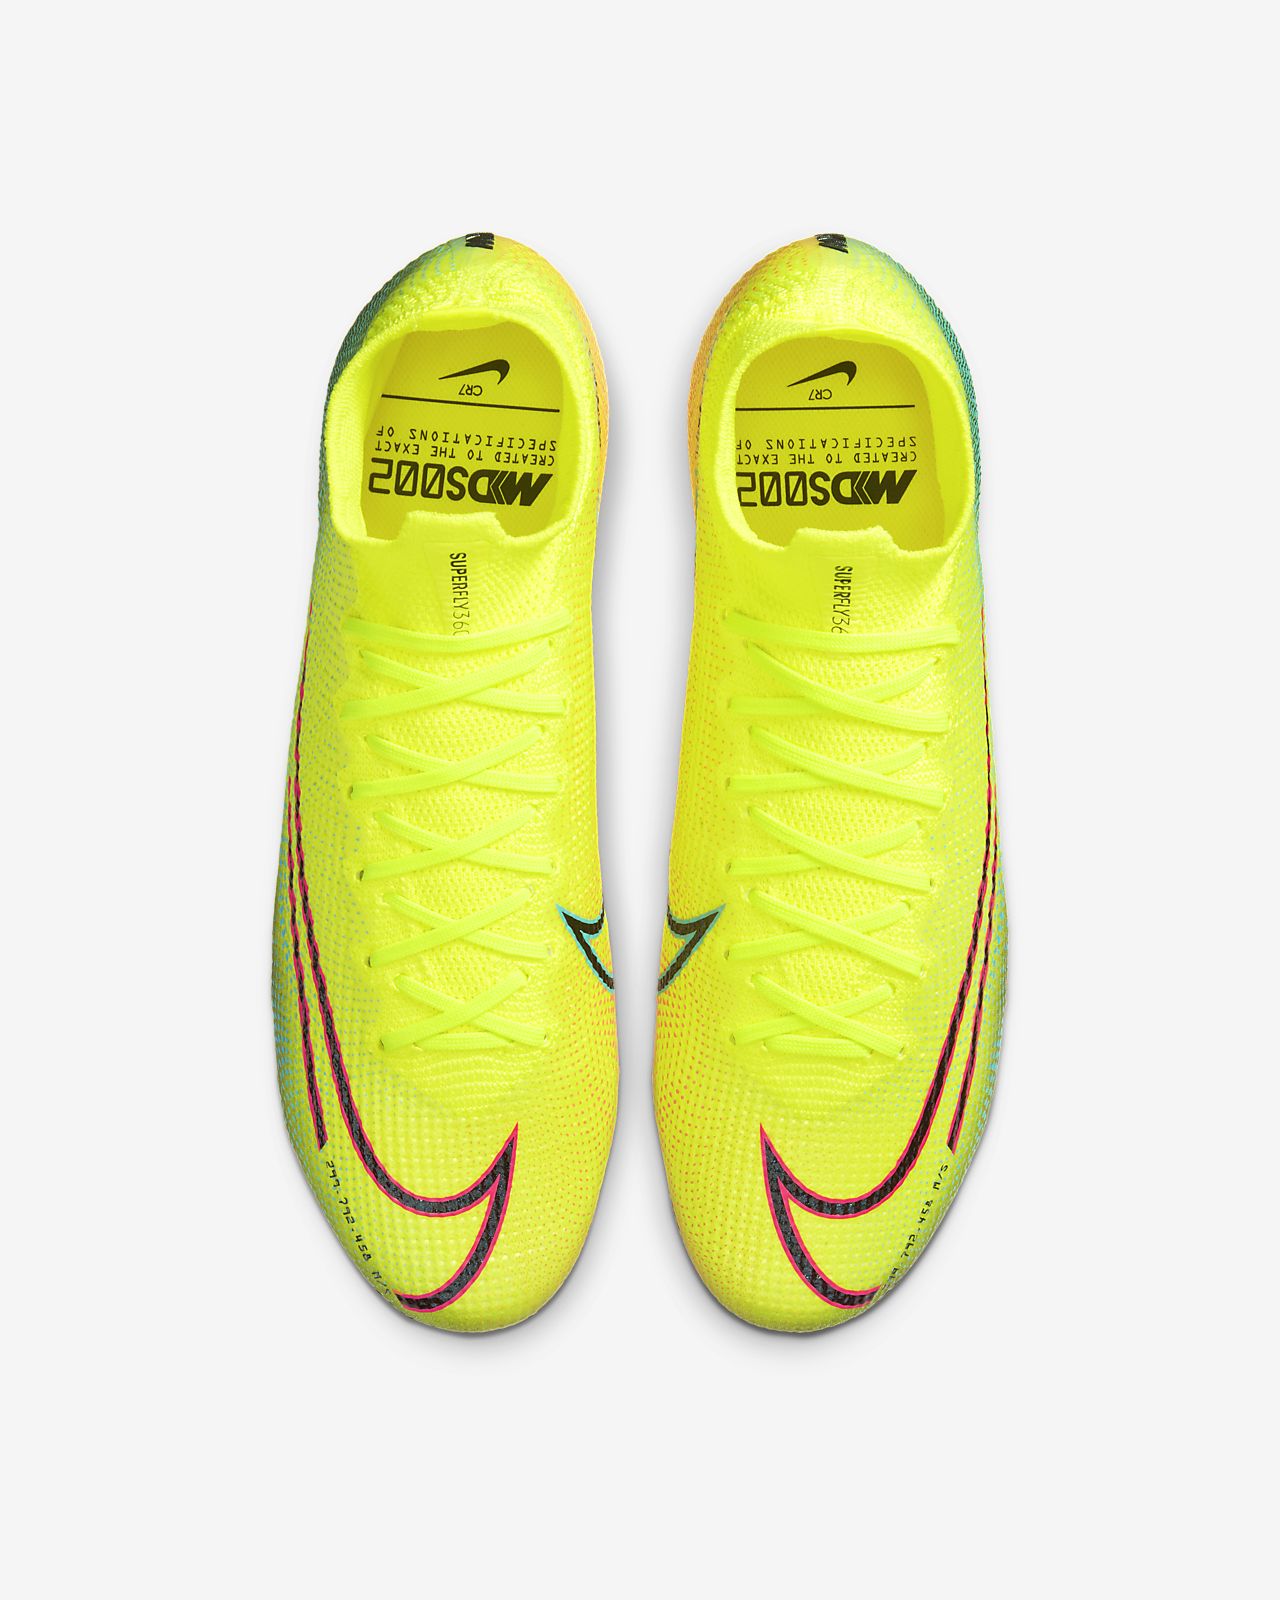 Details about Nike Mercurial Superfly 7 Elite MDS FG.